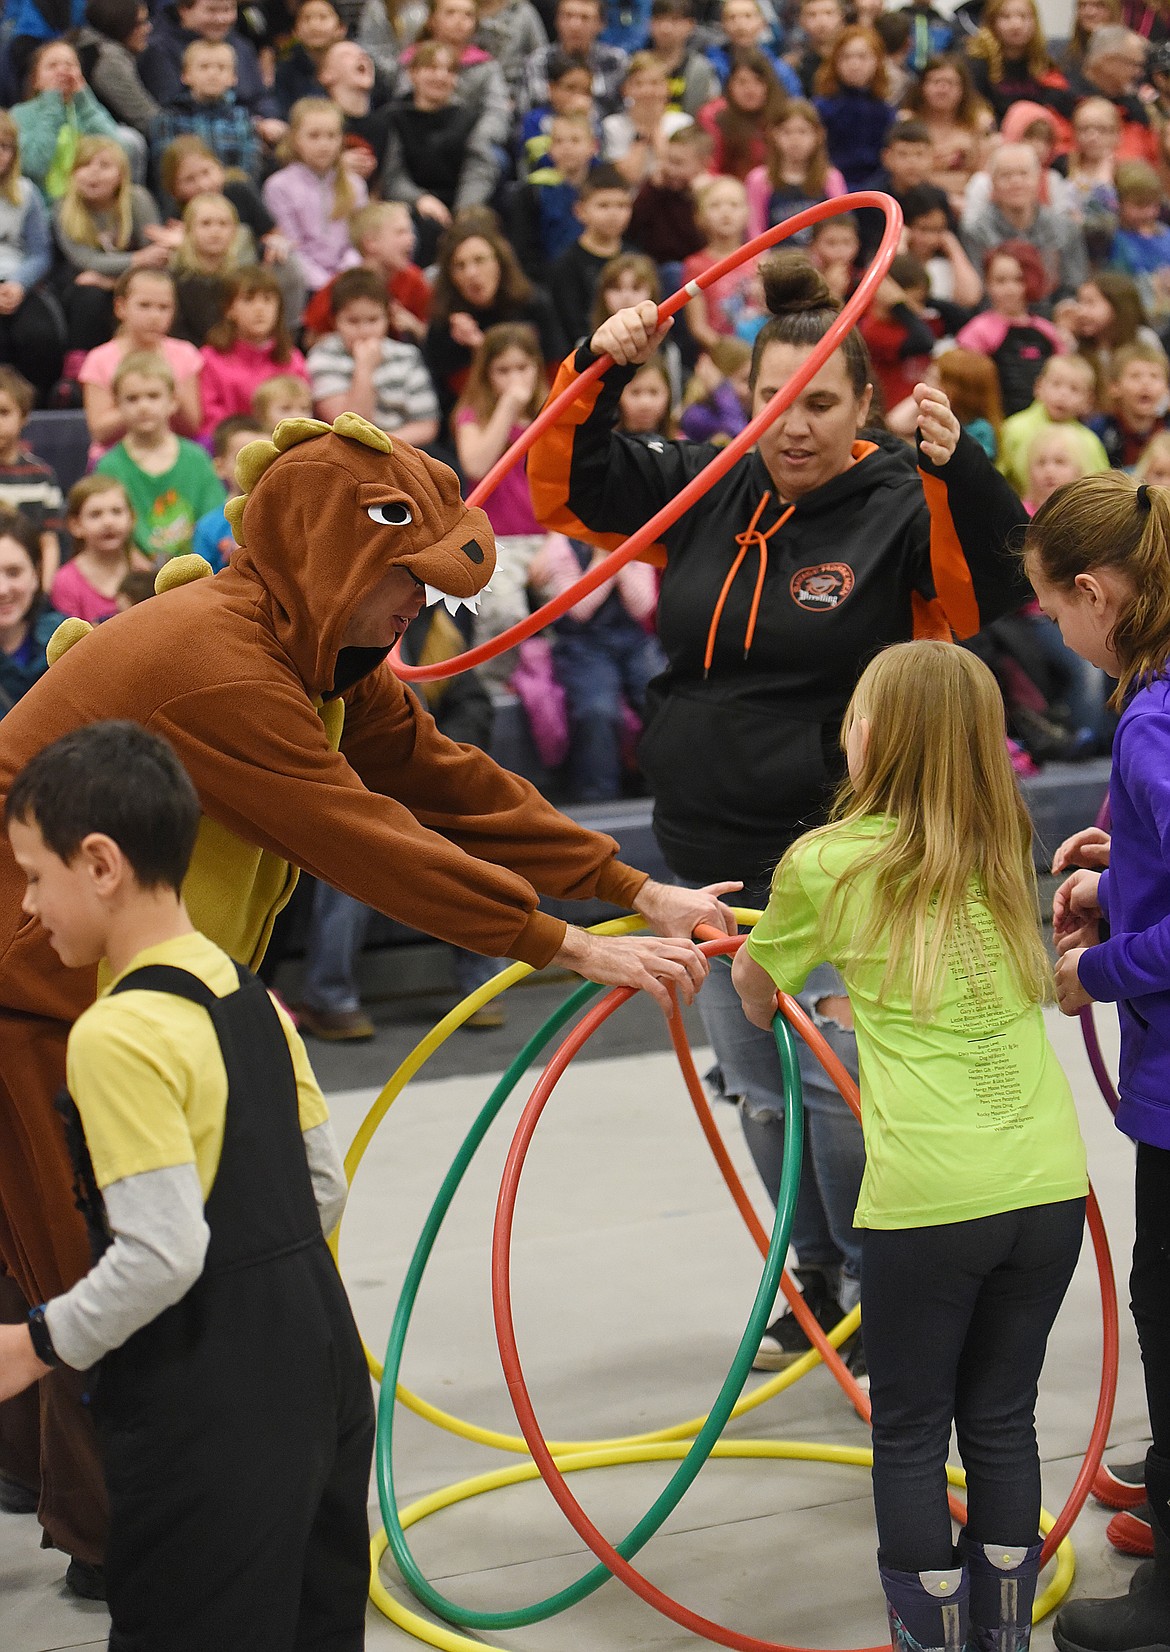 TEAMS OF Plains students and teachers raced to construct a hula hut made of hula hoops during the I Love to Read assembly last Friday in the school gym. Pictured from left are Cage Tuma, &#147;dinosaur&#148; Casey Thompson, Holly Blood, Tia Bellinger and Macey Malmend. Bleachers full of kindergarden- through sixth-grade students are in the background. (Joe Sova photos/Clark Fork Valley Press)